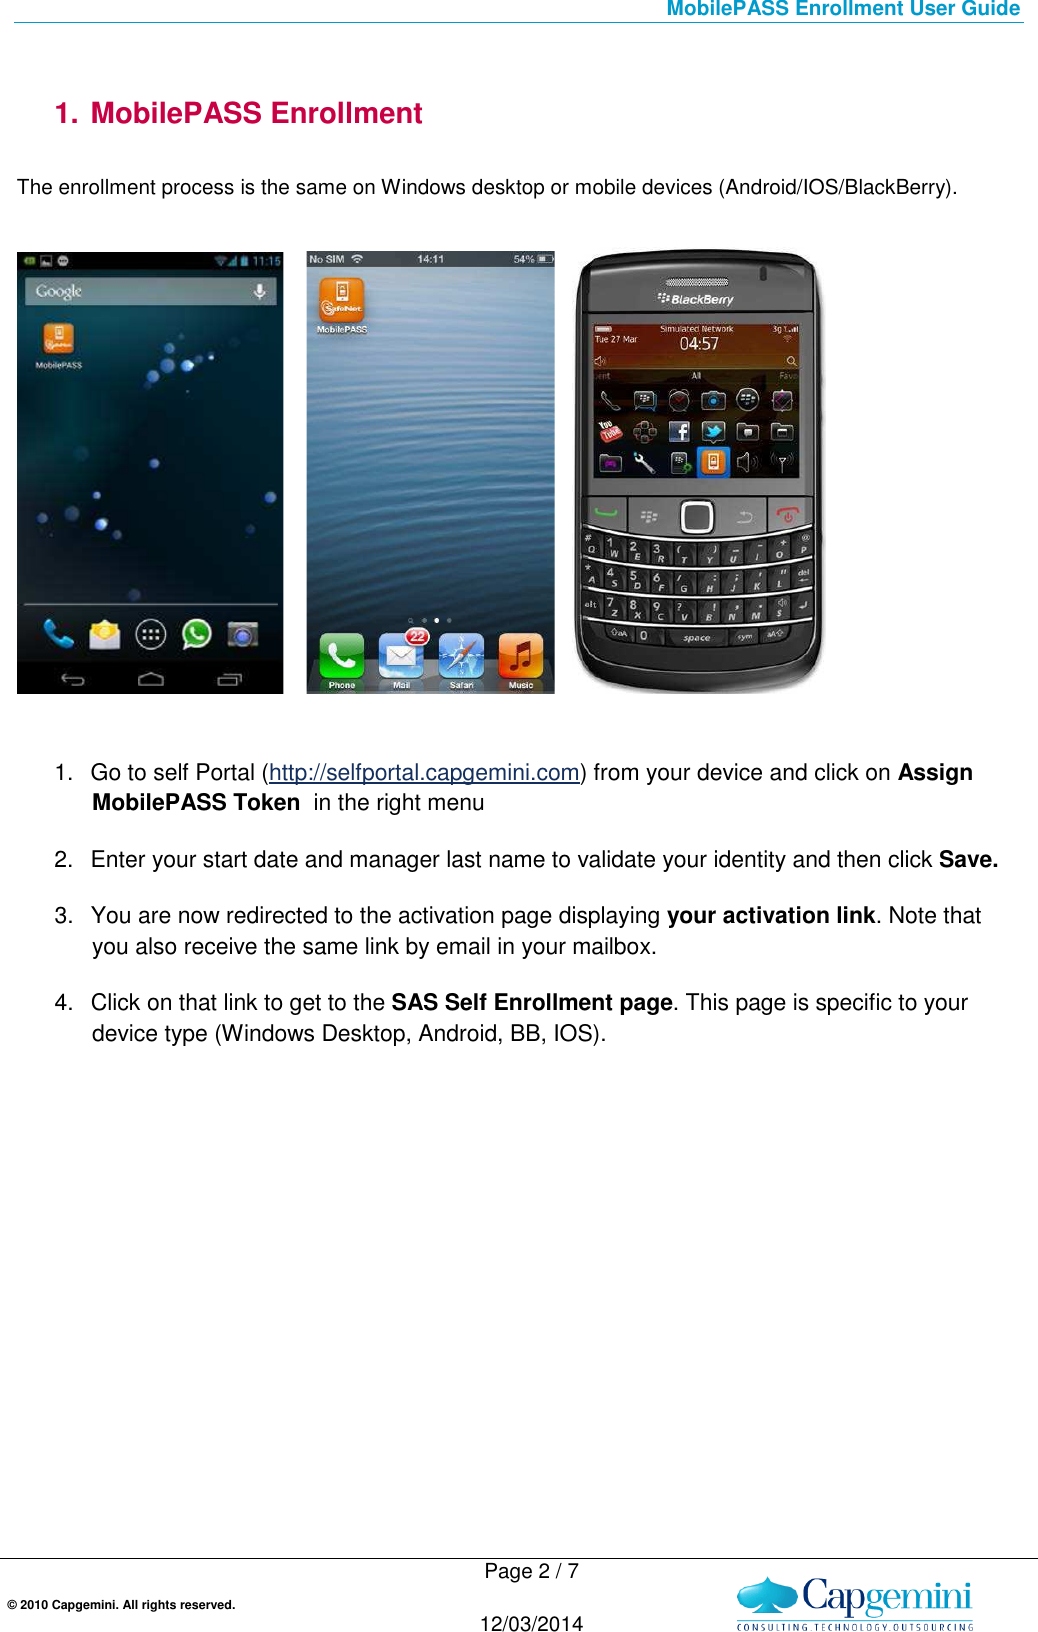 Page 3 of 7 - MobilePASS Enrollment User Guide Mobile PASS